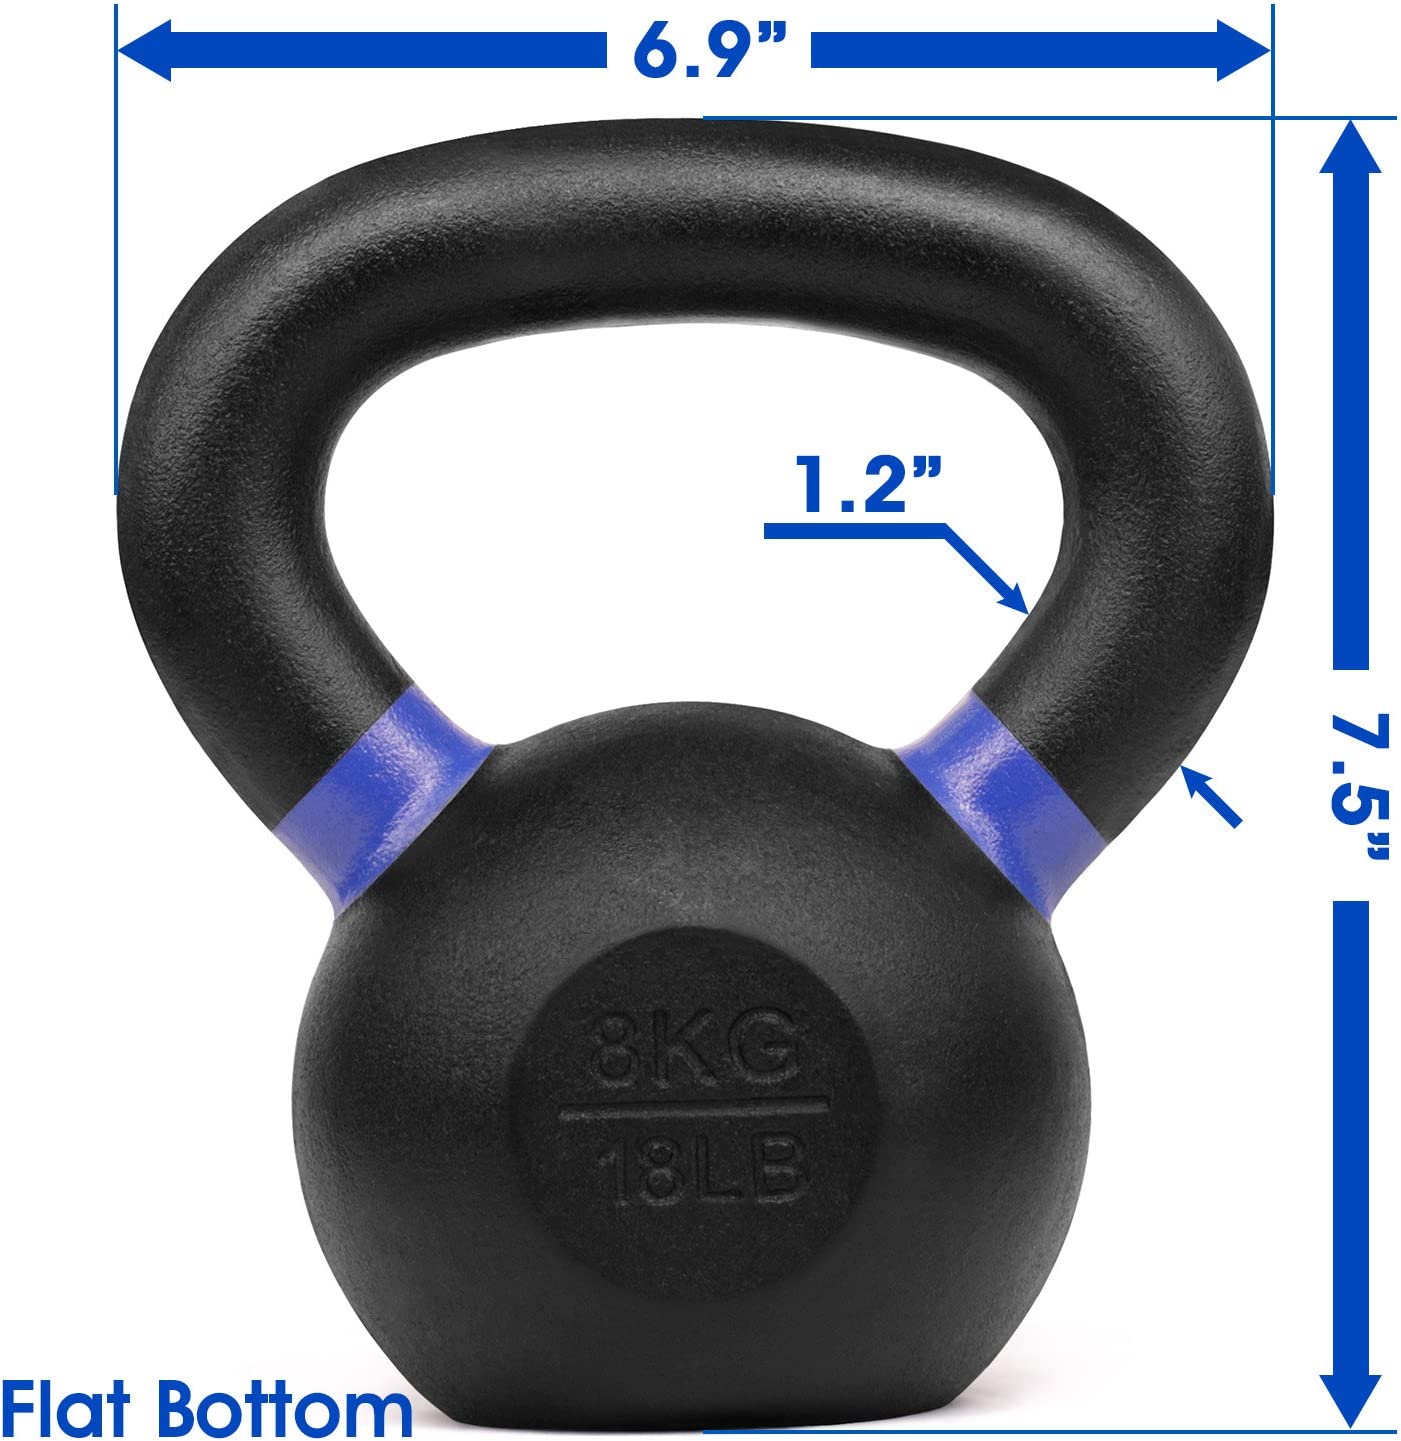 Yes4All 8kg / 18lb Powder Coated Kettlebell, Single - image 5 of 9